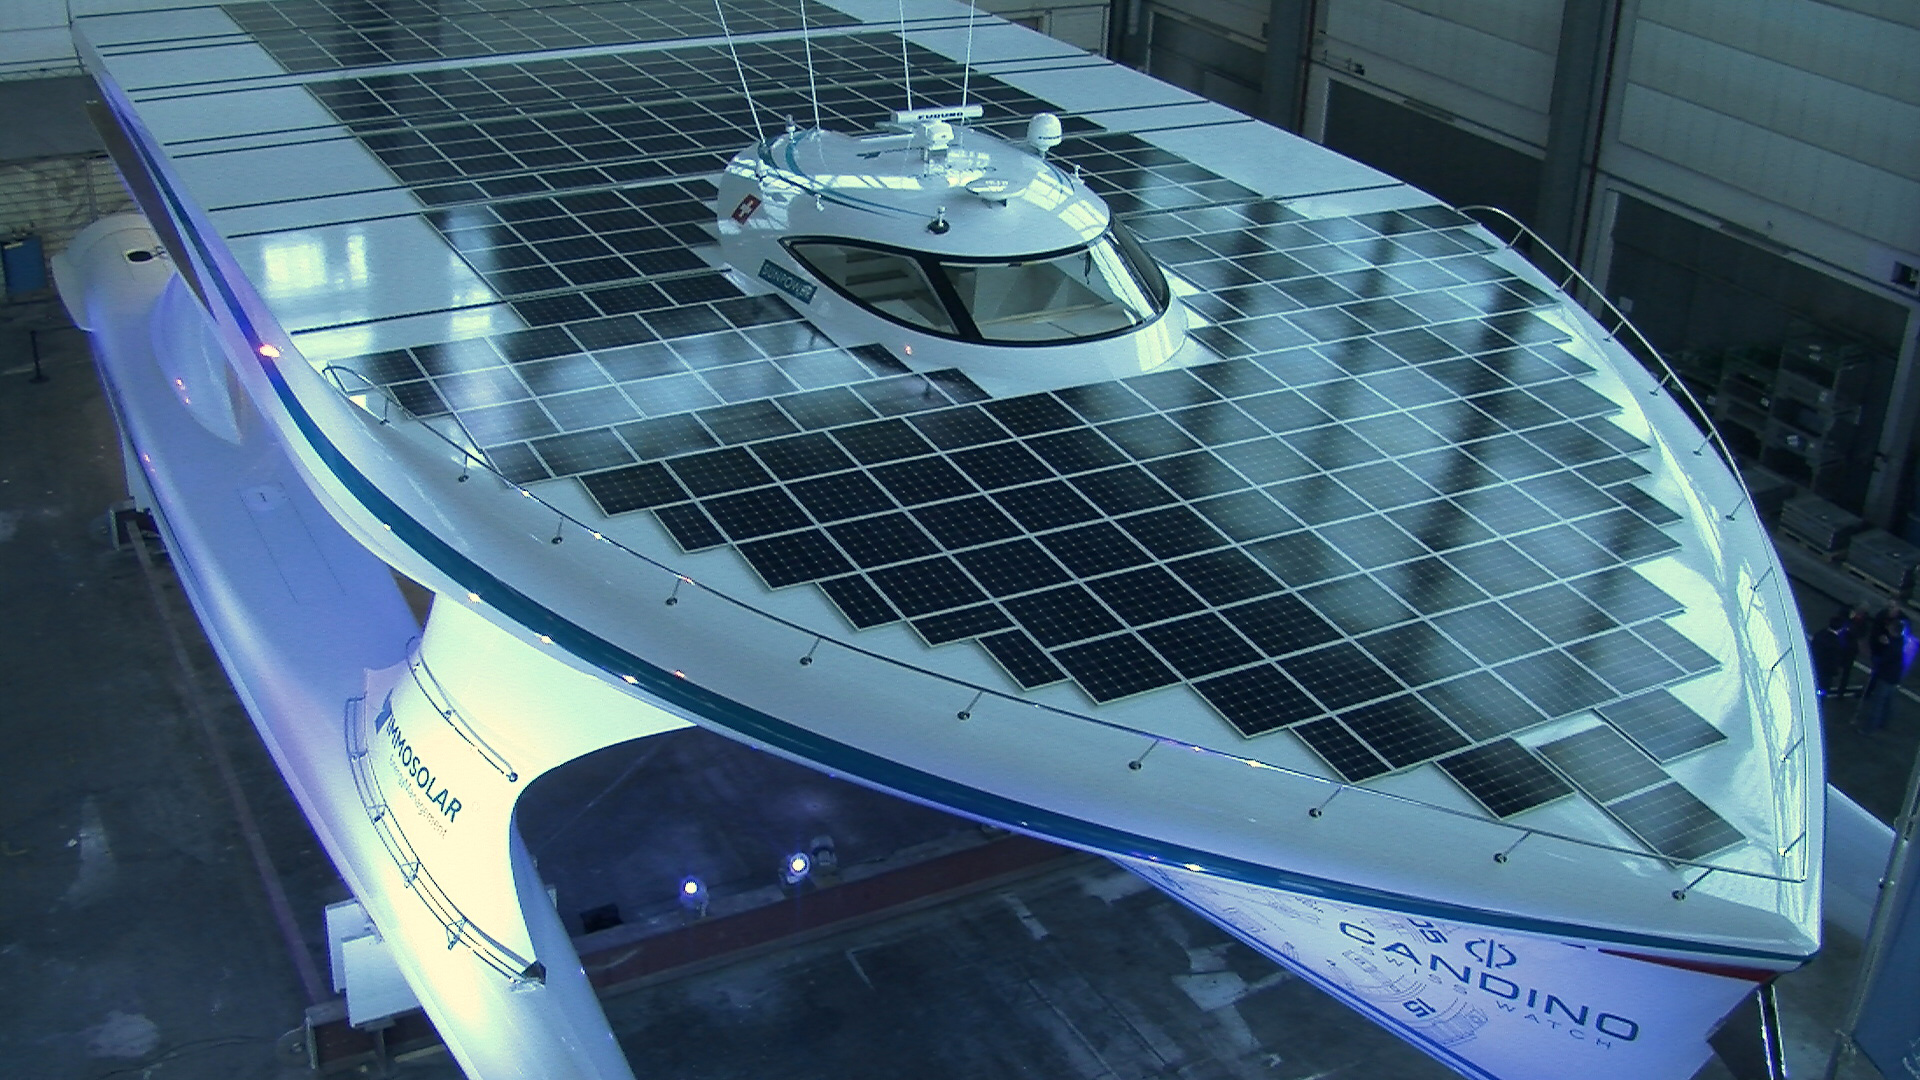 DuPont to Supply Materials for the Largest Solar Boat Ever Built